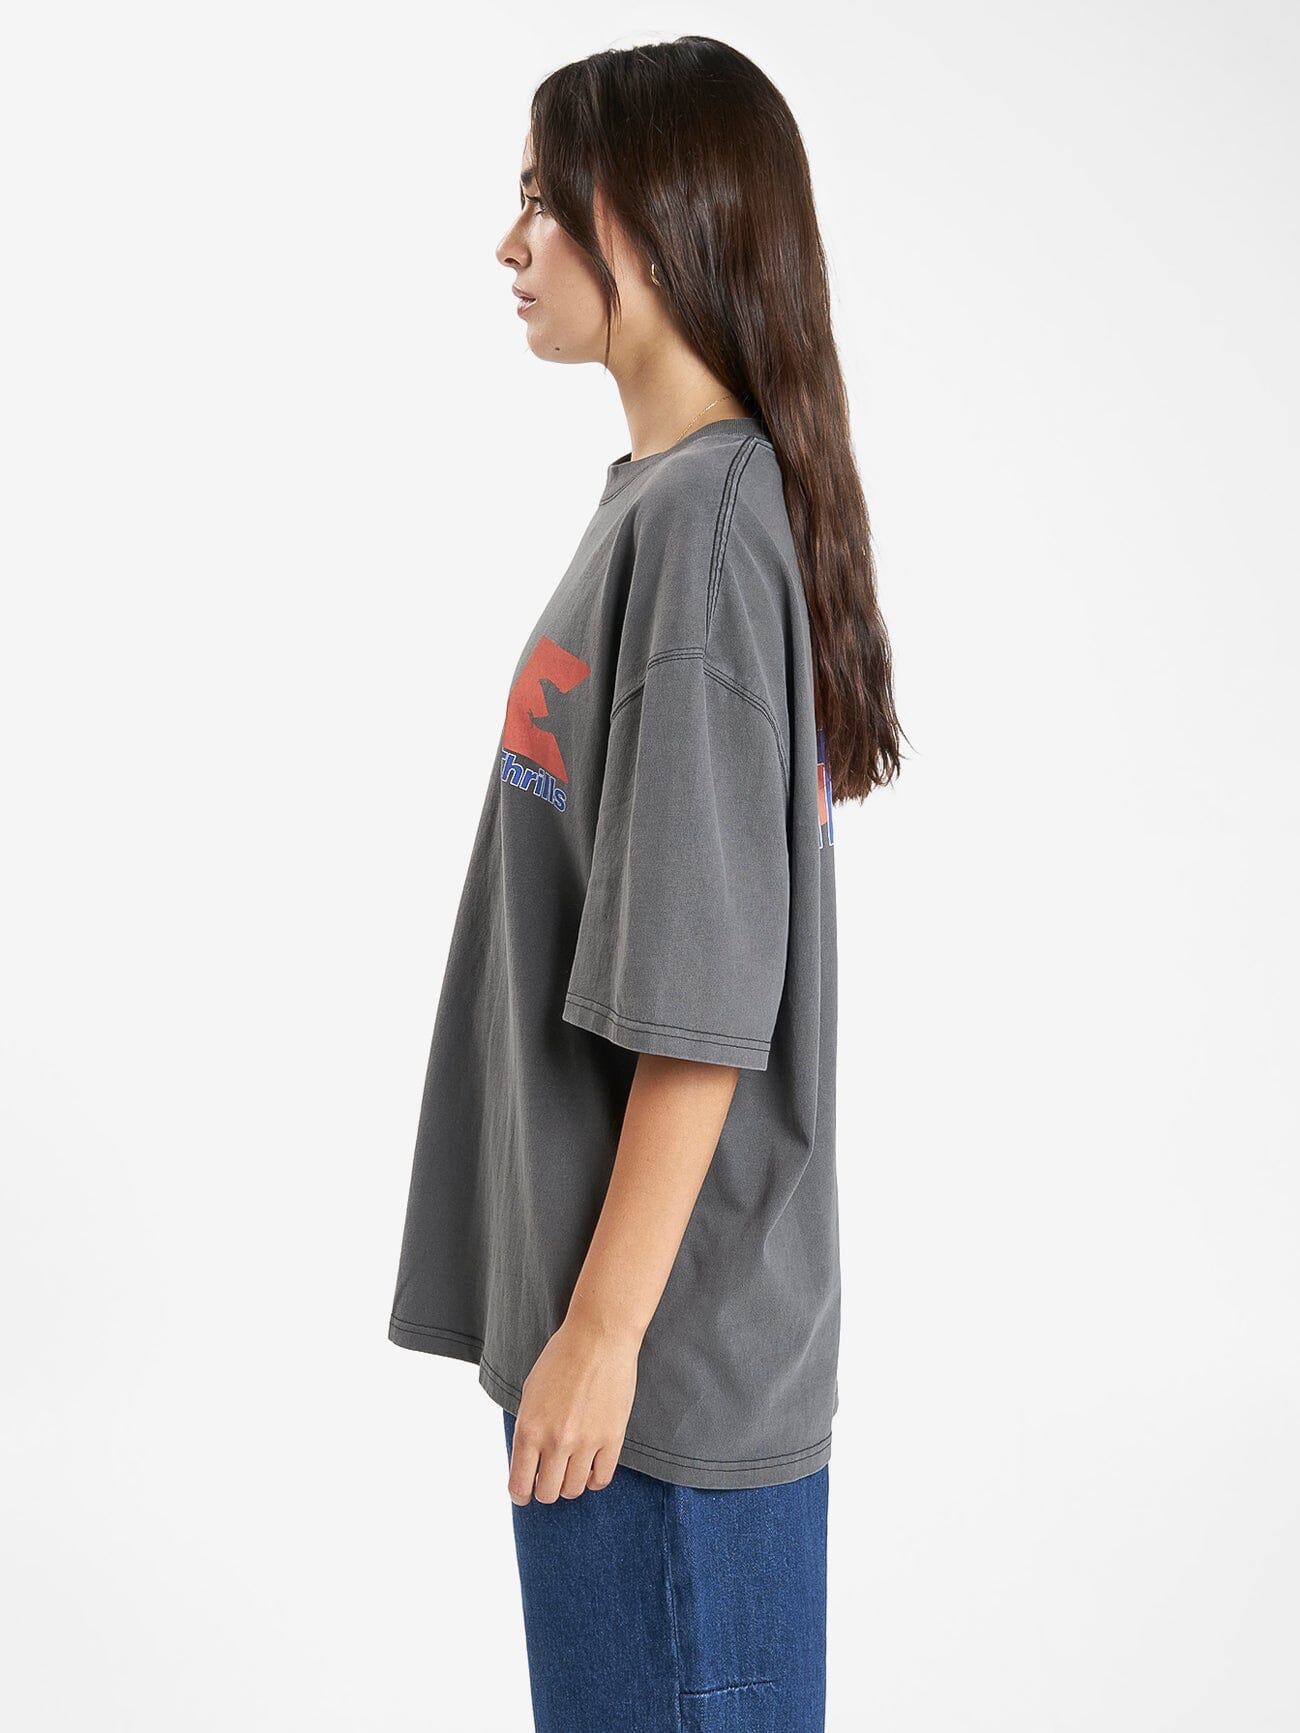 United Front Oversized Tee - Merch Black 4